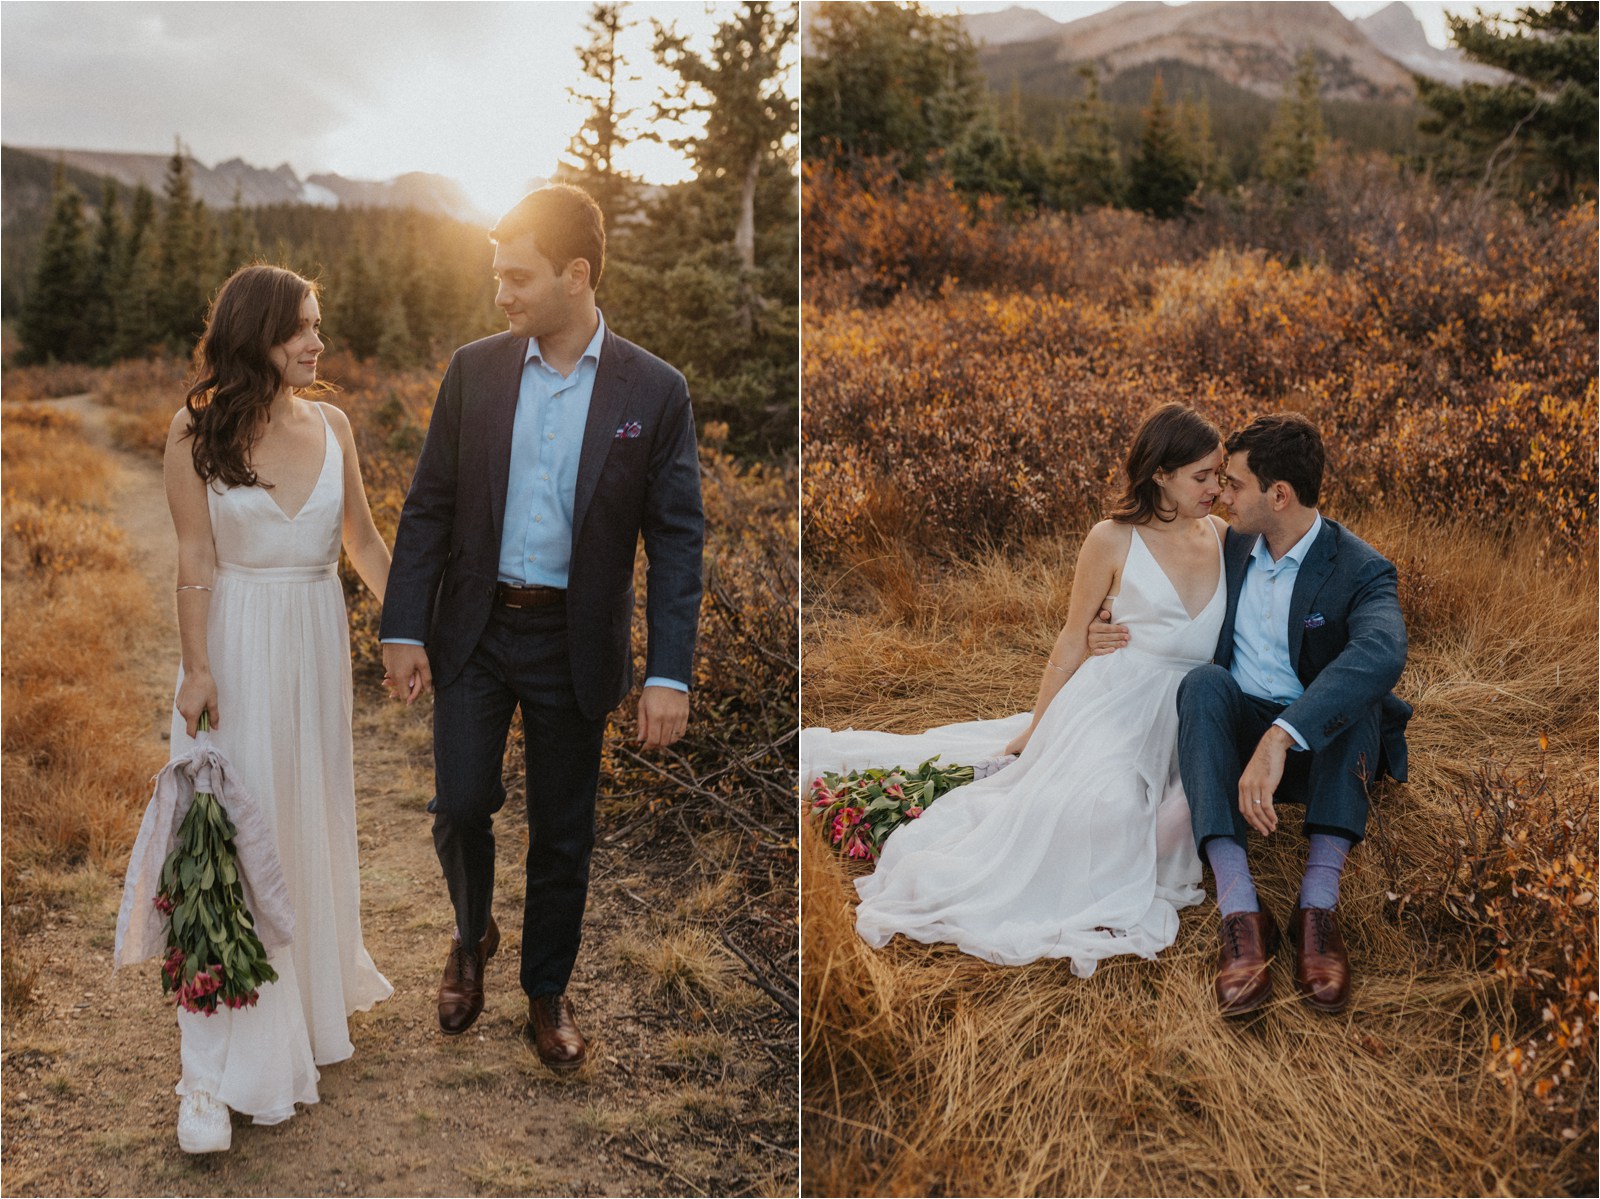 portraits of the married couple at sunset, walking and sitting among fall foliage for their elopement in Colorado.